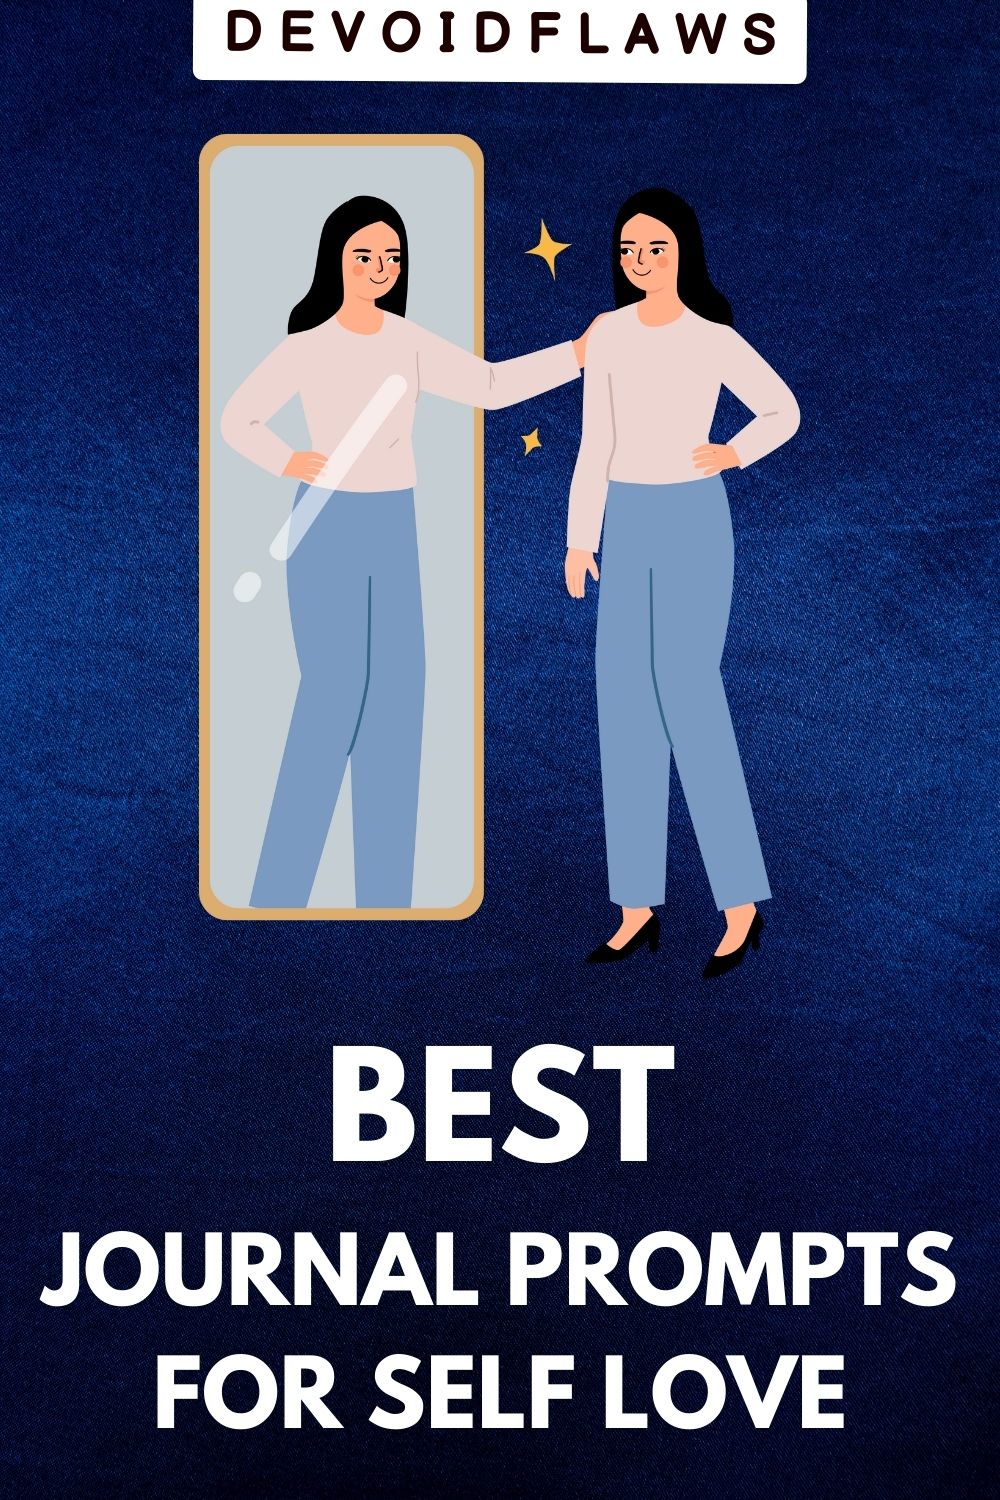 image with text - best journal prompts for self love